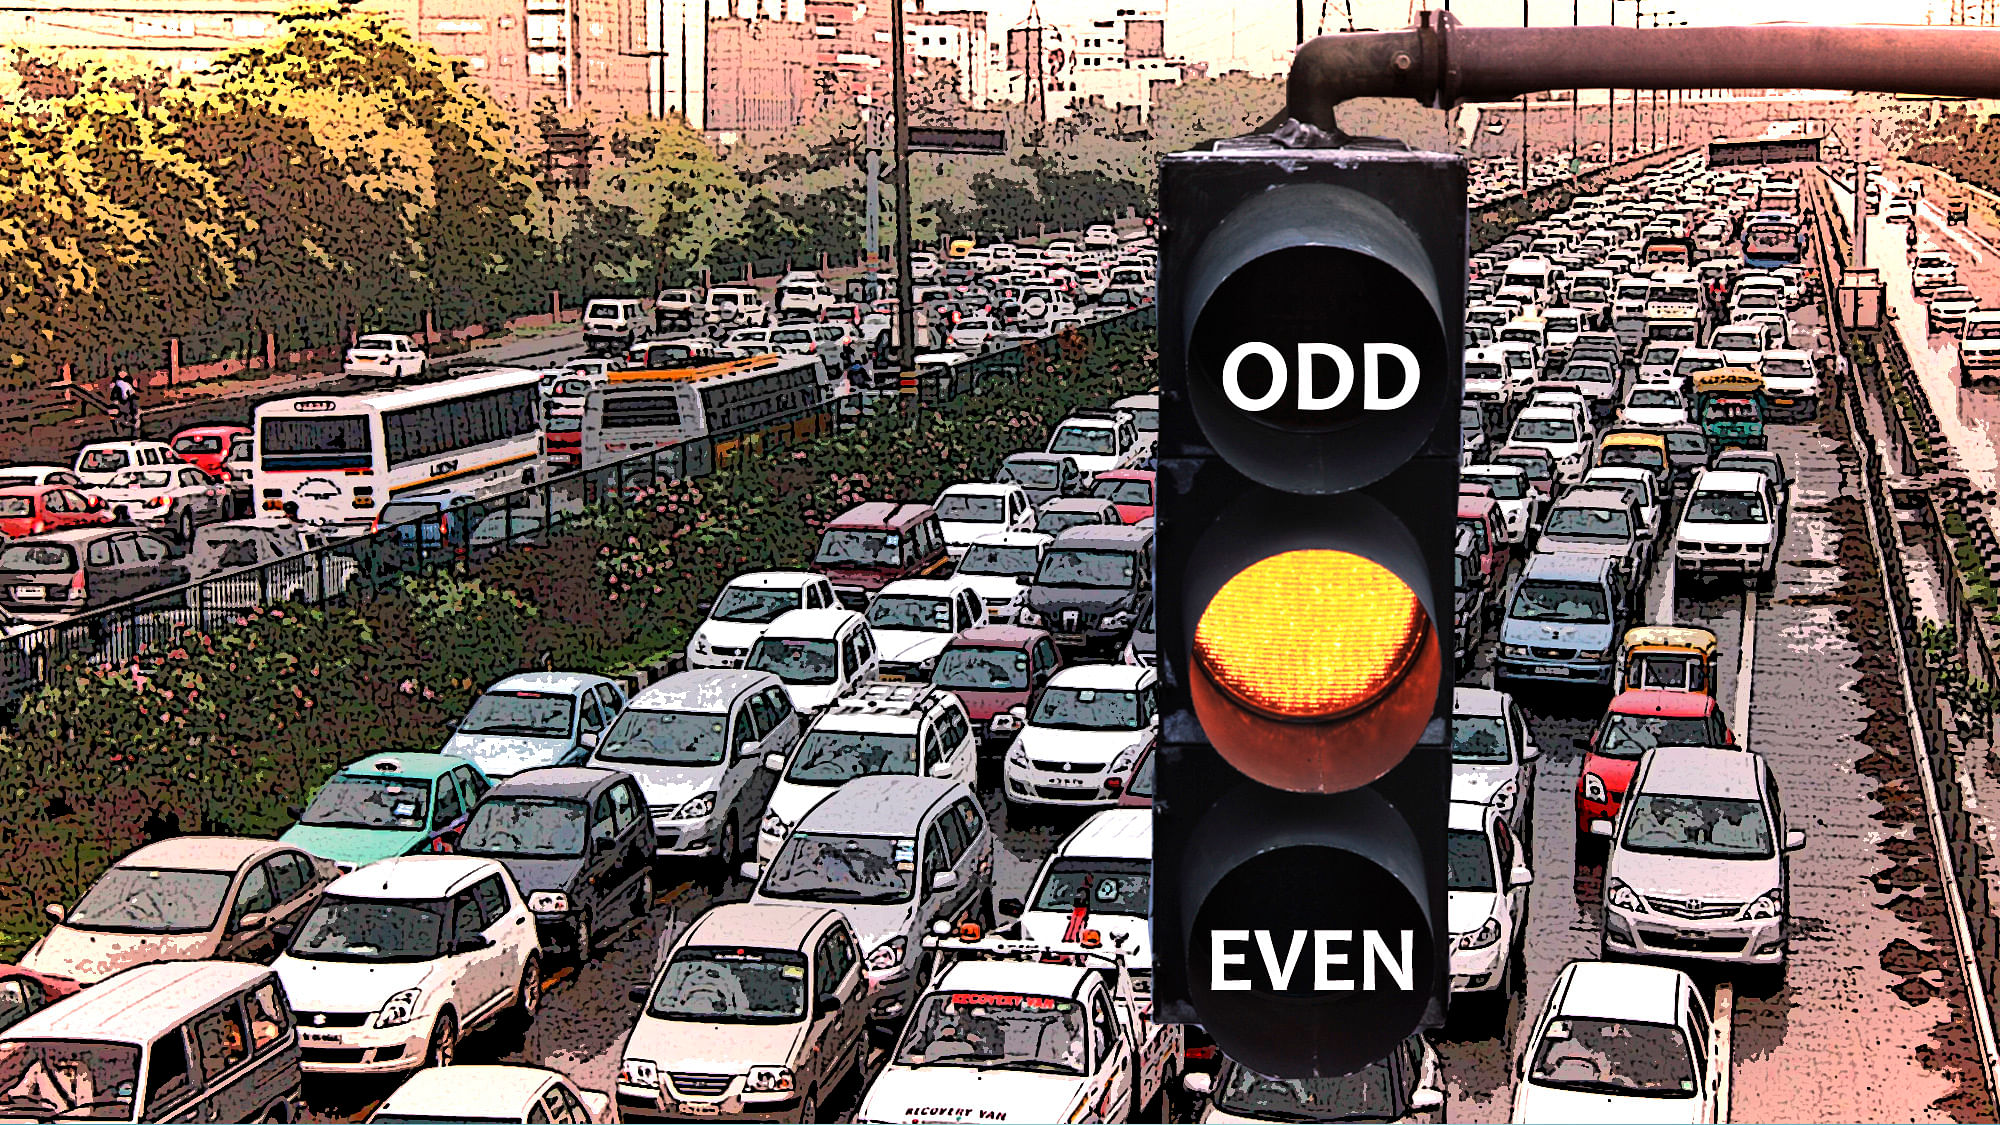 The Delhi government has forwarded a second petition to NGT to implement the odd-even scheme.